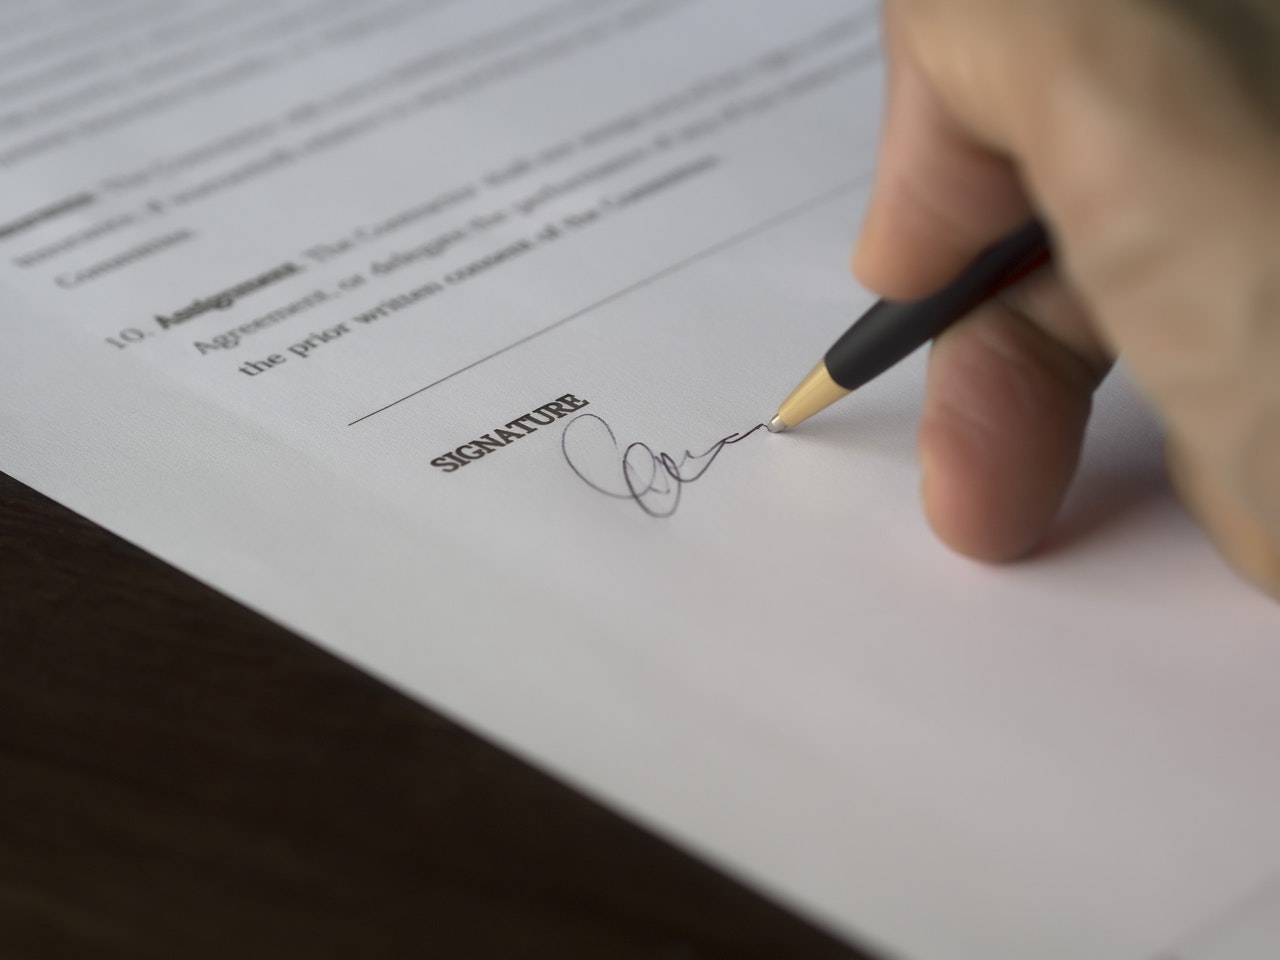 person writing a dance studio registration form with a pen on a paper